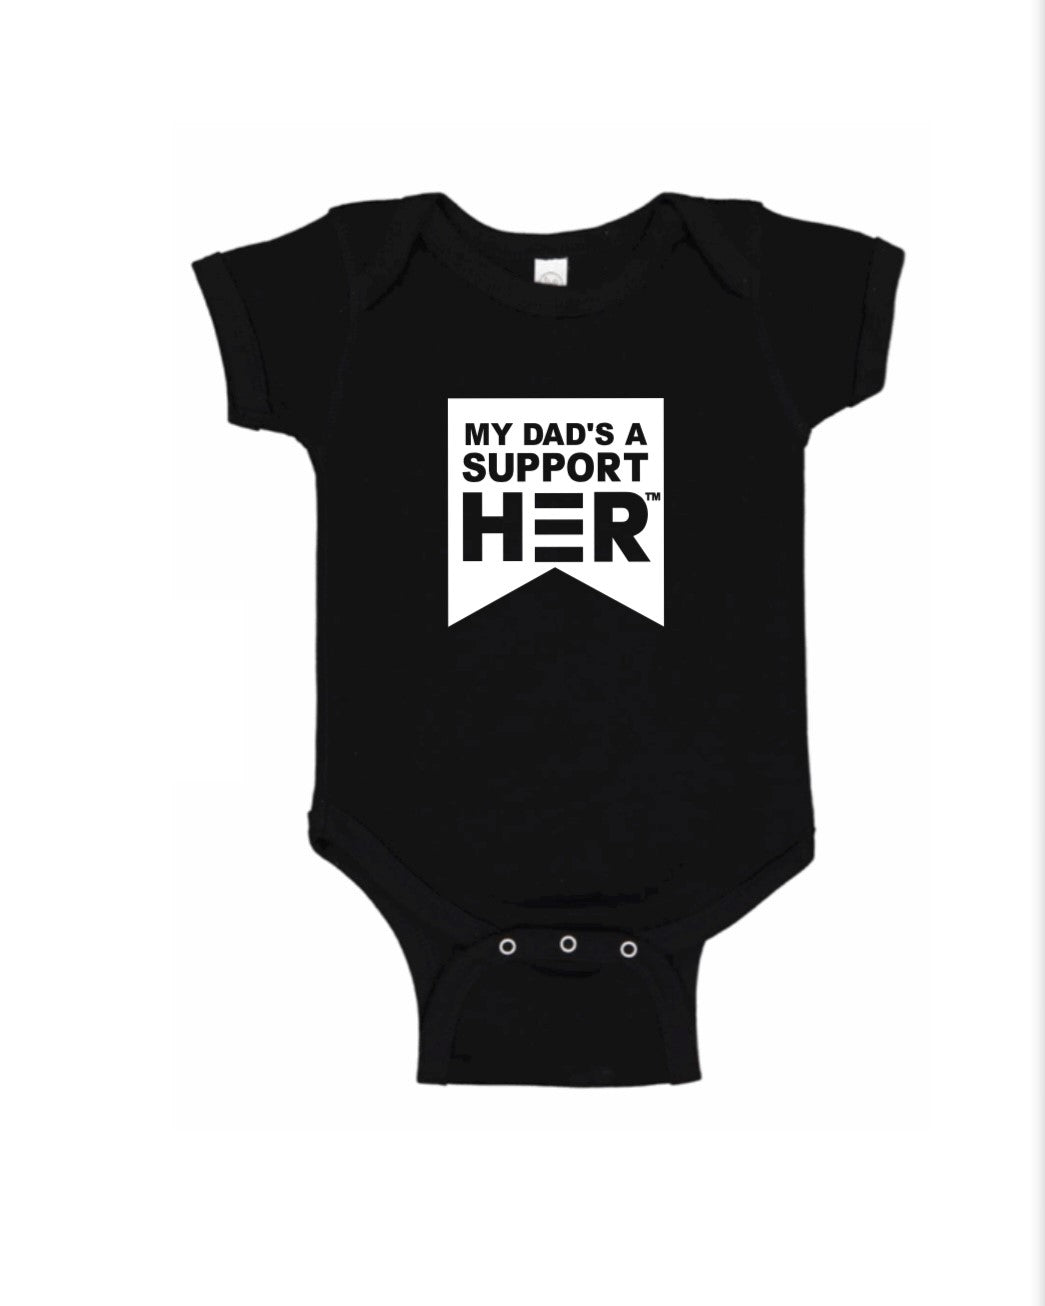 My Dad's a SupportHER -Baby Onesie - Black